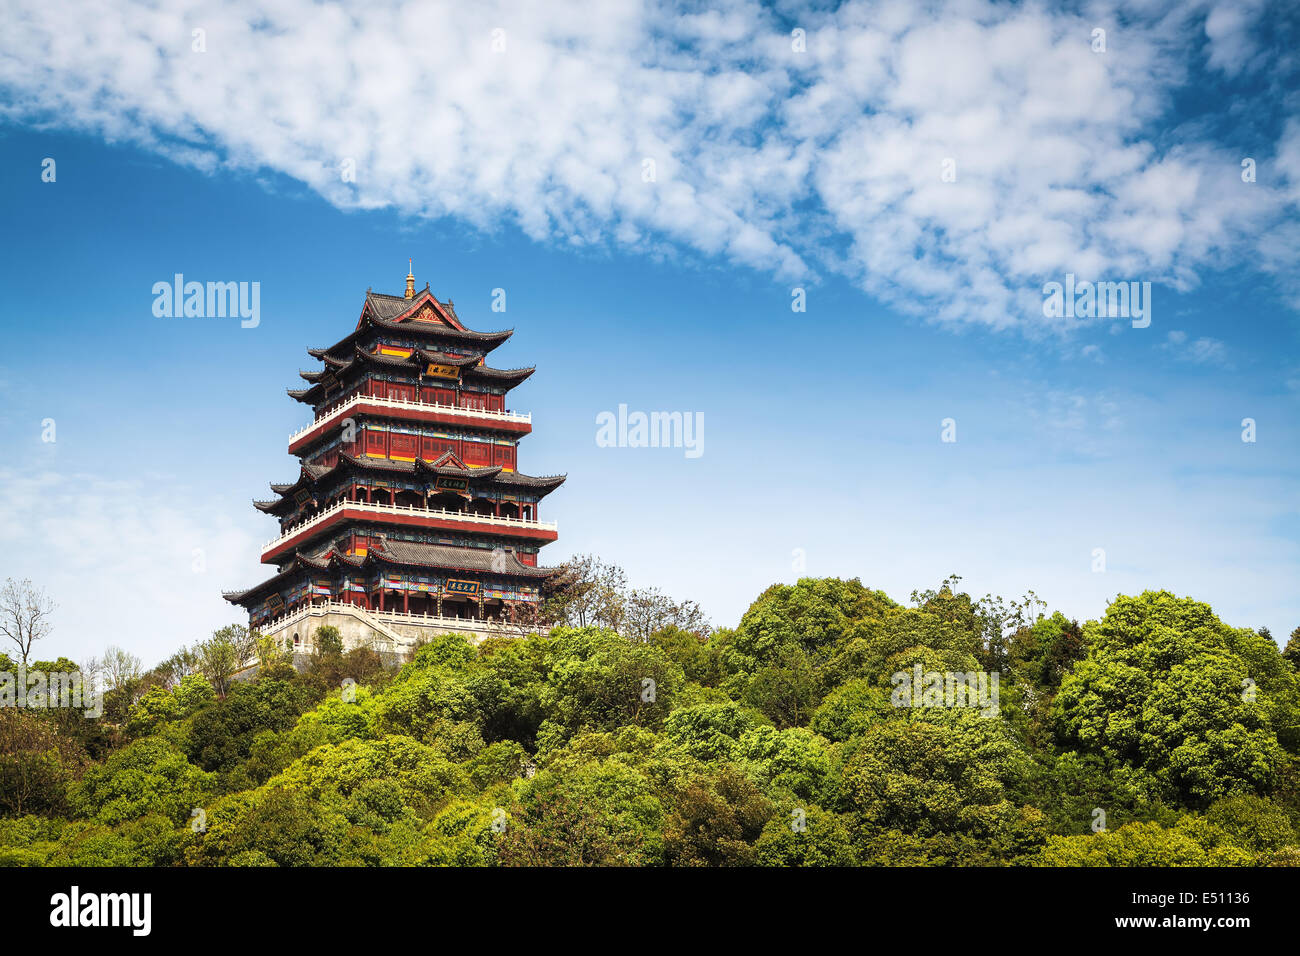 chinese traditional style tower Stock Photo